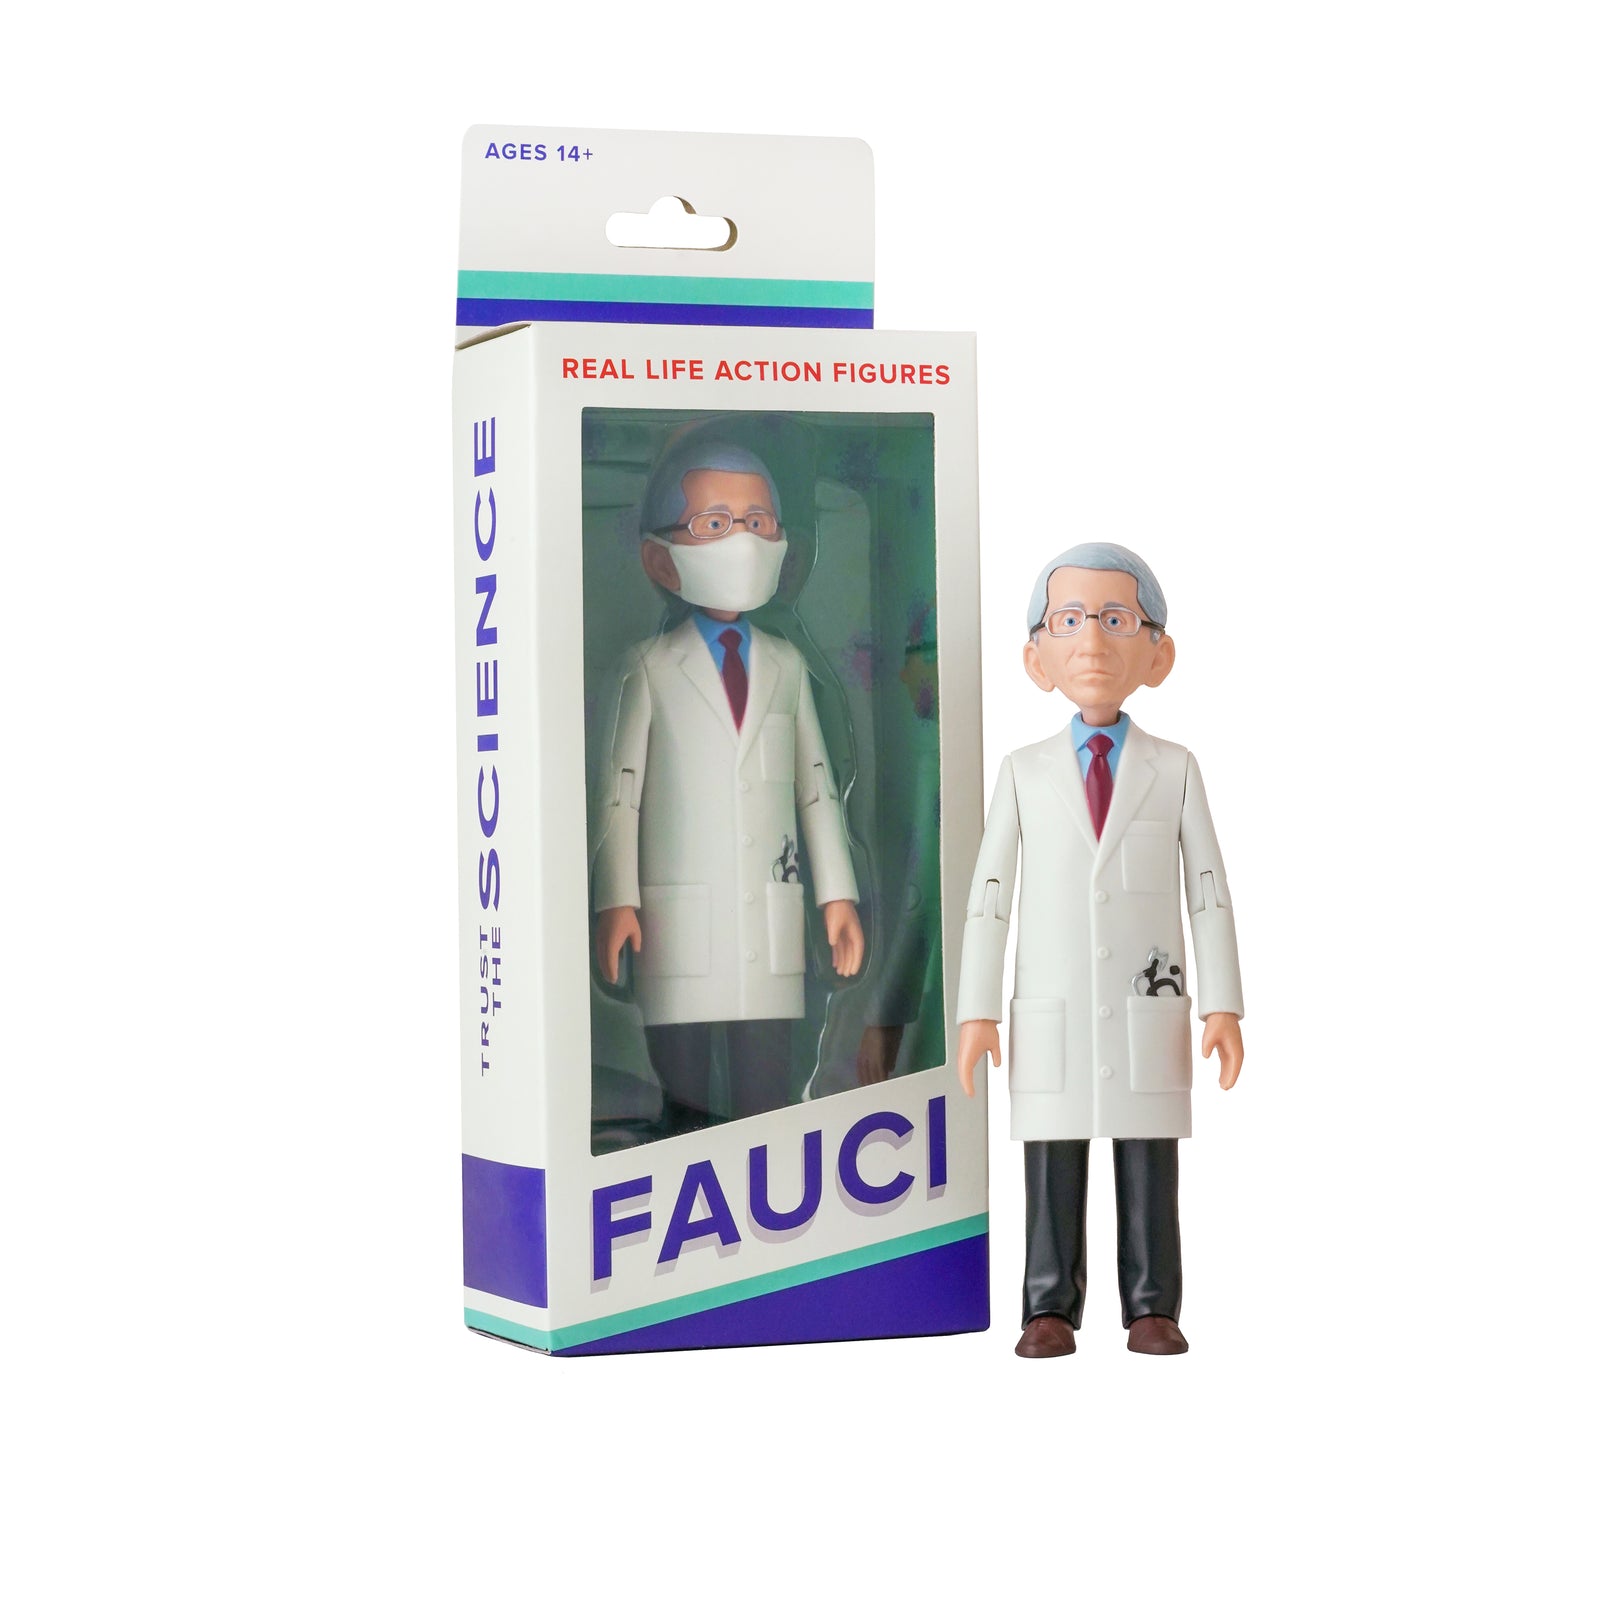 ID_Fauci_Front_ProductPackage_3000_1600x.jpg